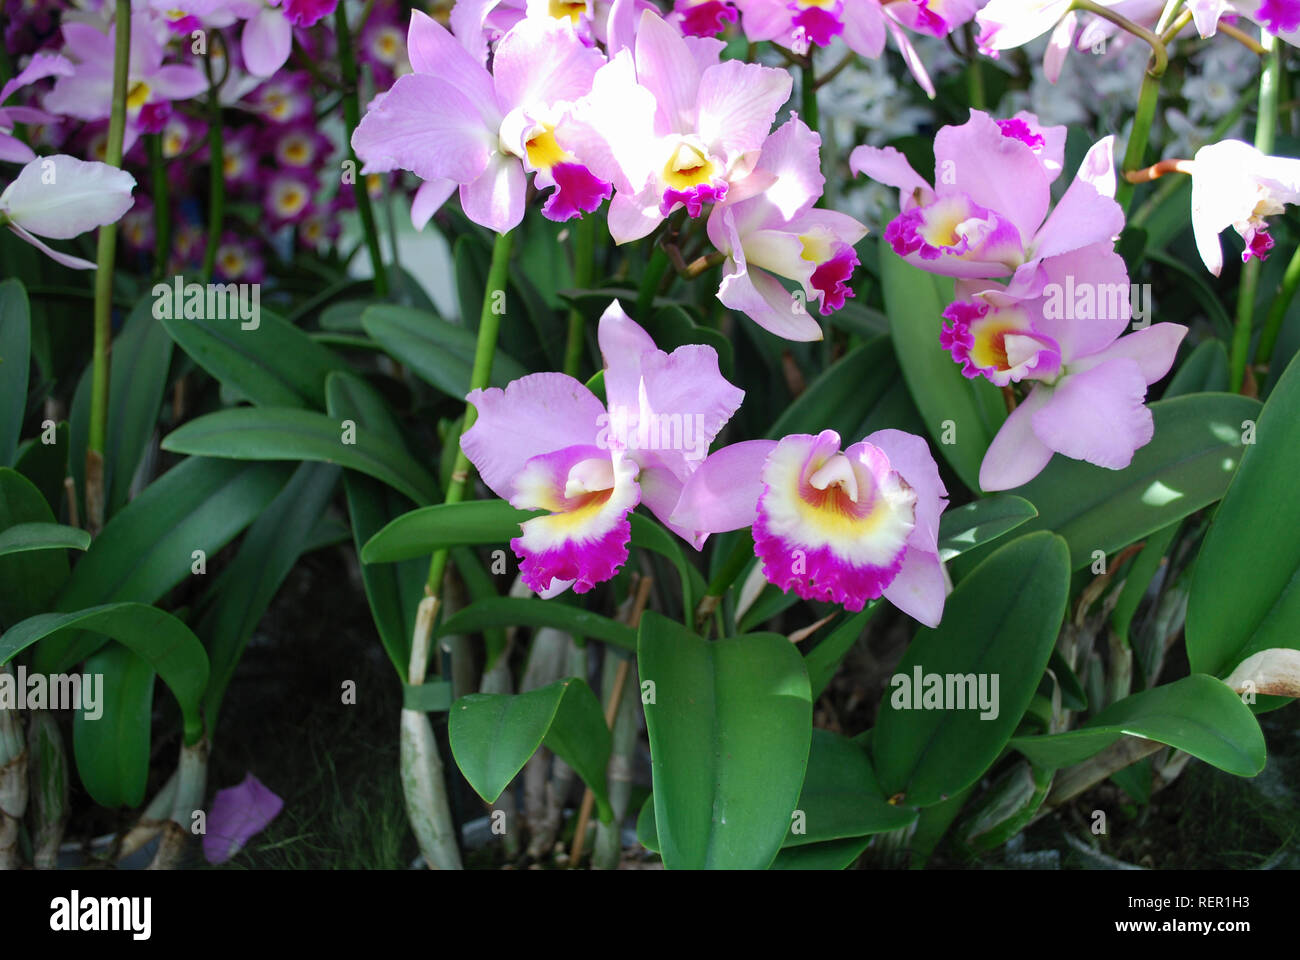 Cattleya mendelii Orchids flowers. Decorative plants for gardening and greenhouse. Stock Photo